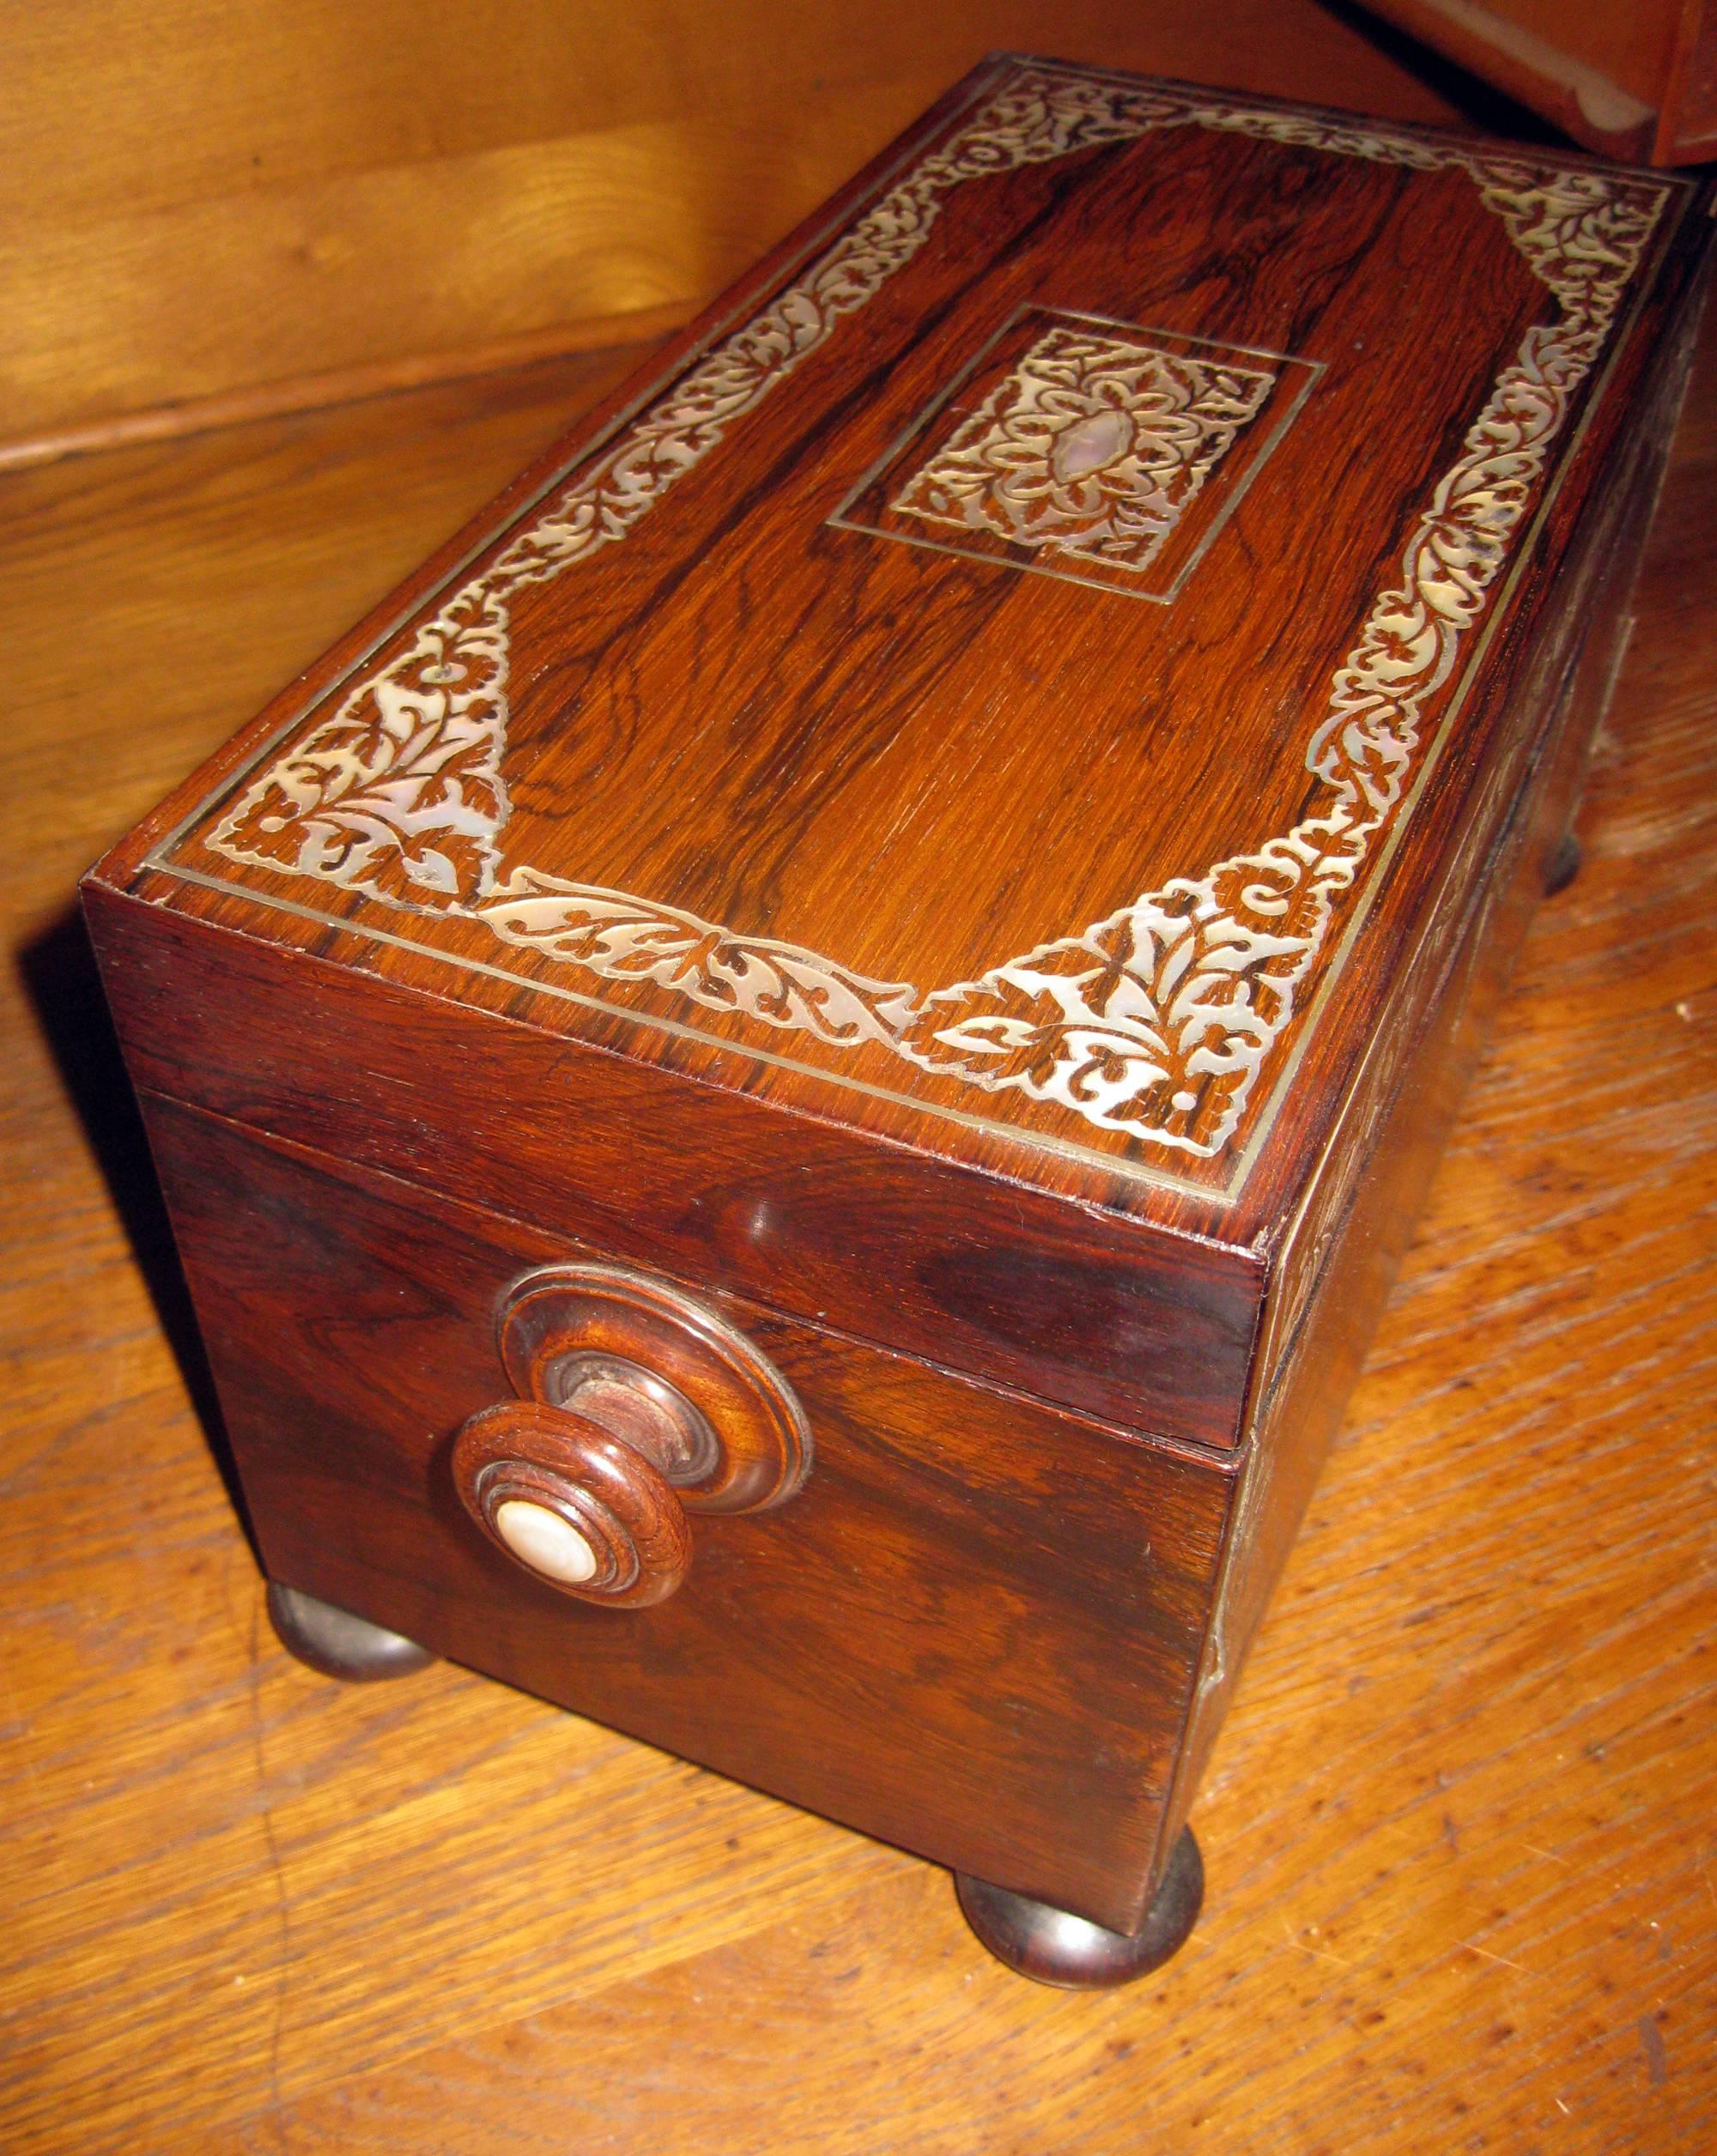 Mother-of-Pearl 19th century English Rosewood Tea Caddy with Mother of Pearl Inlay For Sale